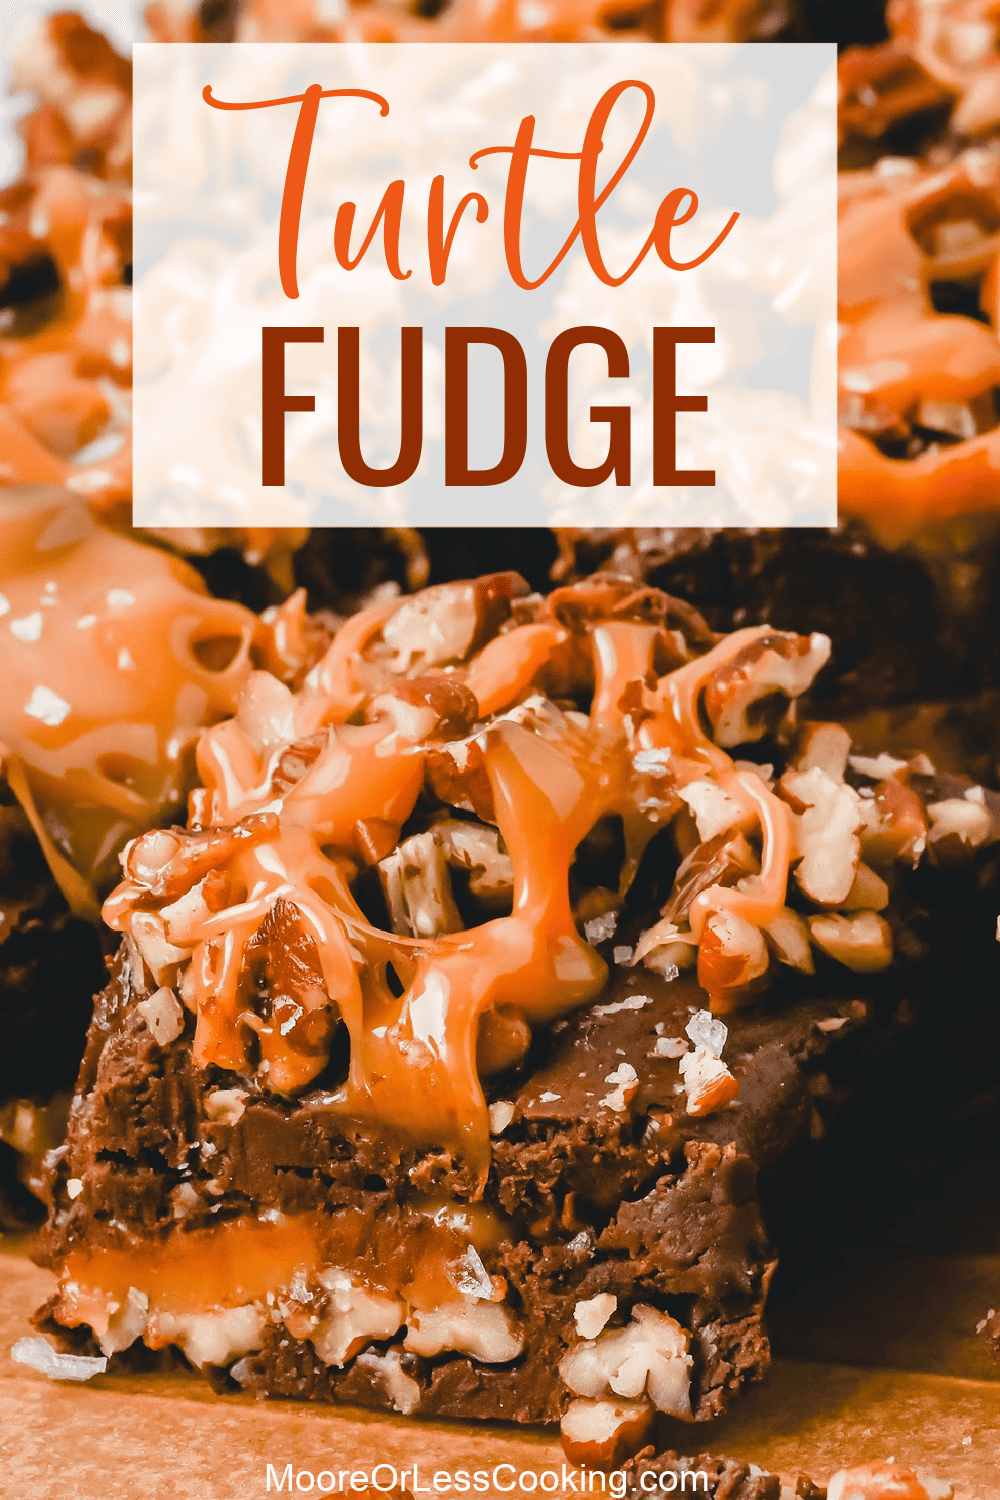 Layers of chocolate fudge, pecans and creamy caramel make this the best fudge you’ll ever eat. via @Mooreorlesscook